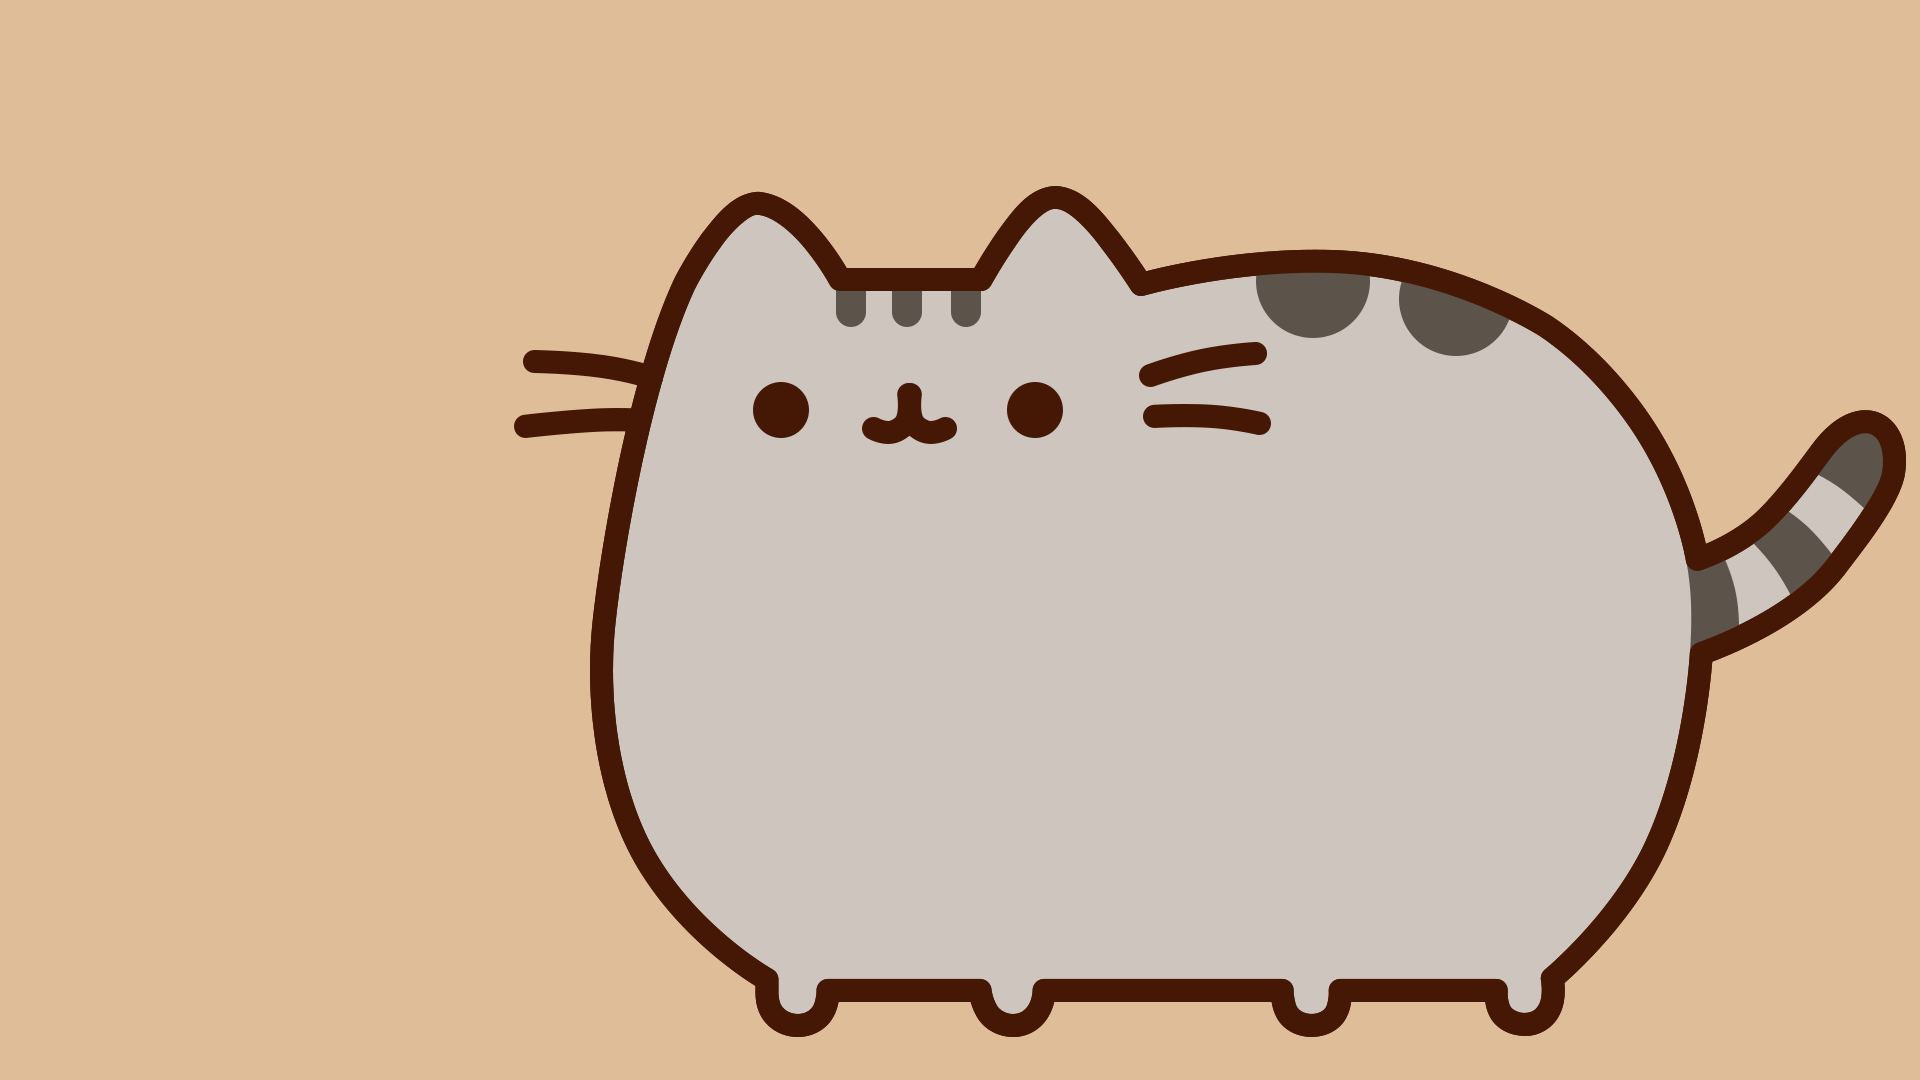 Pusheen Thanksgiving Wallpapers posted by Ethan Tremblay